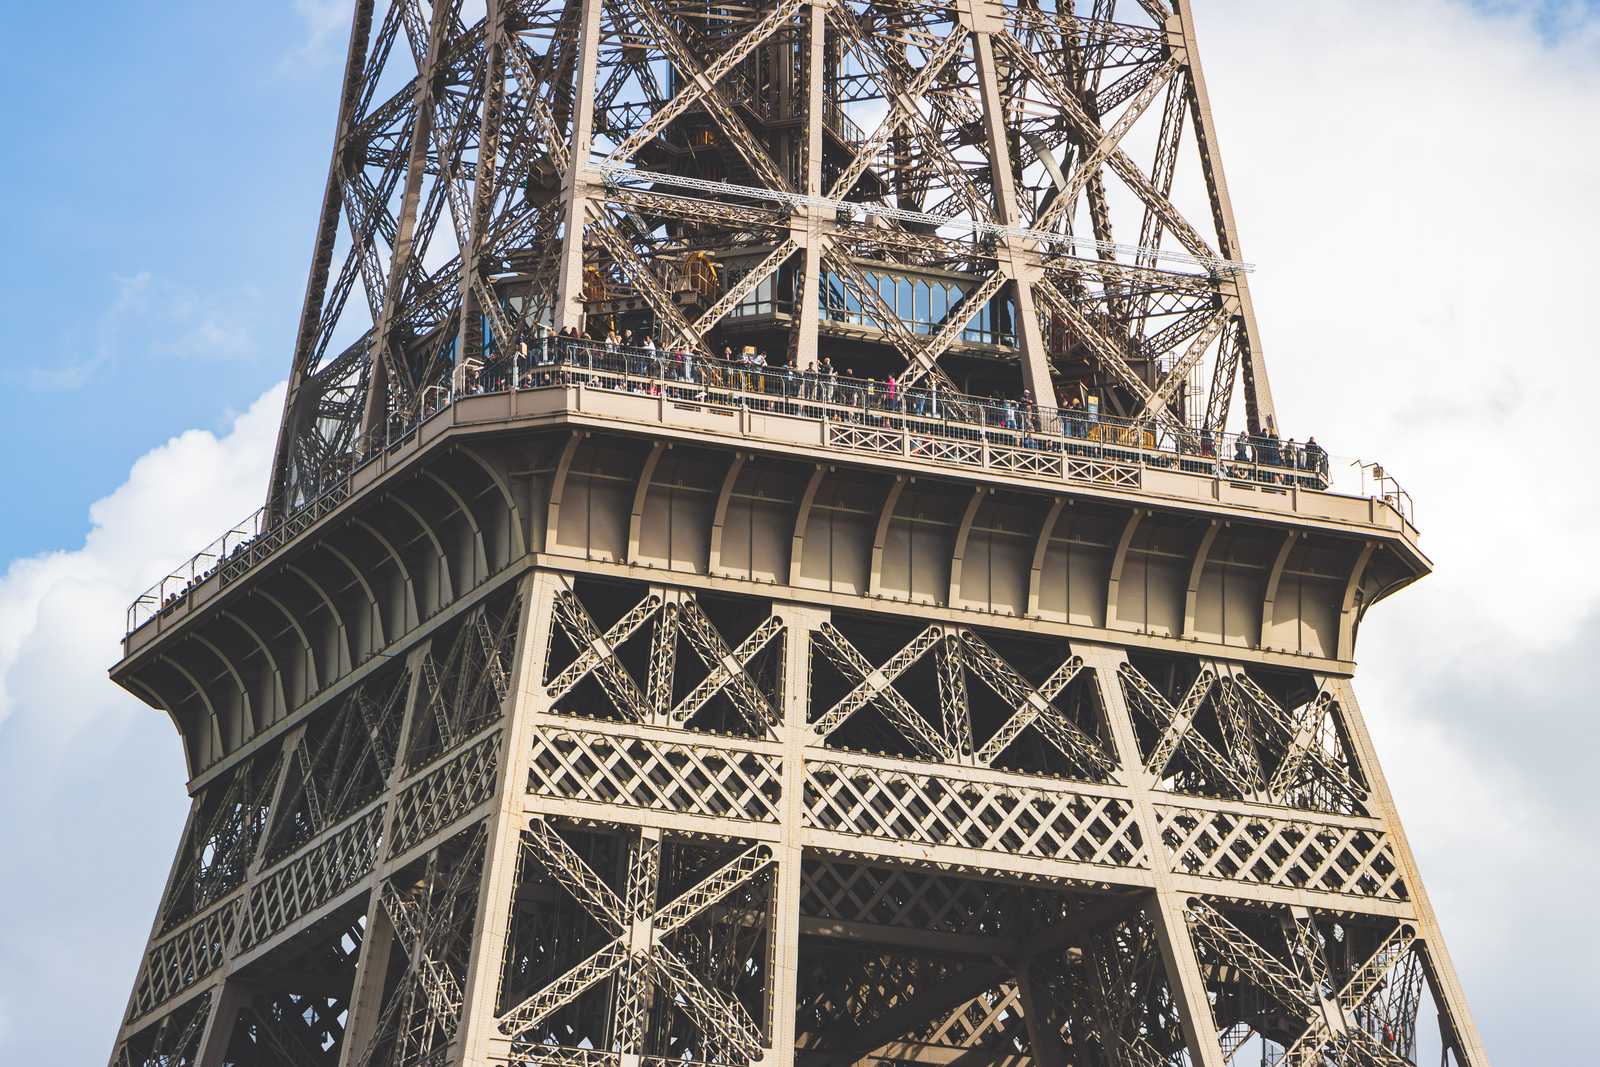 A view of one of the observation levels on the Eiffel tower, with tiny people visible among the dull grey-brown wrought iron of the archiecture